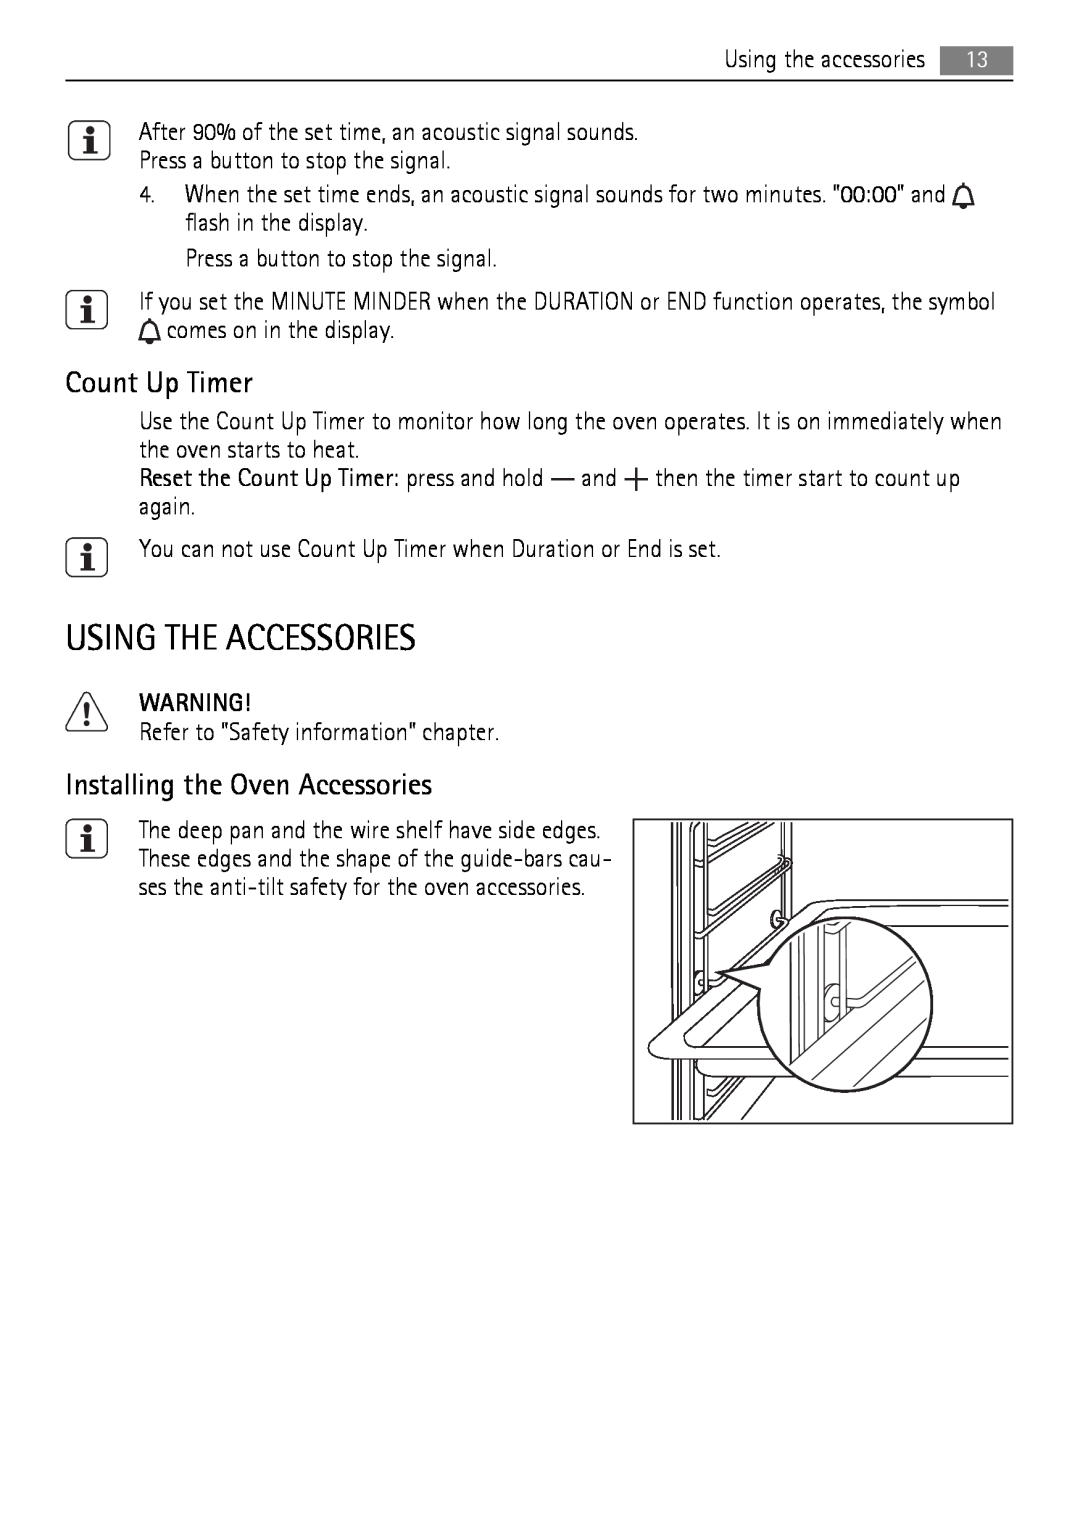 AEG BP5003001 user manual Using The Accessories, Count Up Timer, Installing the Oven Accessories 